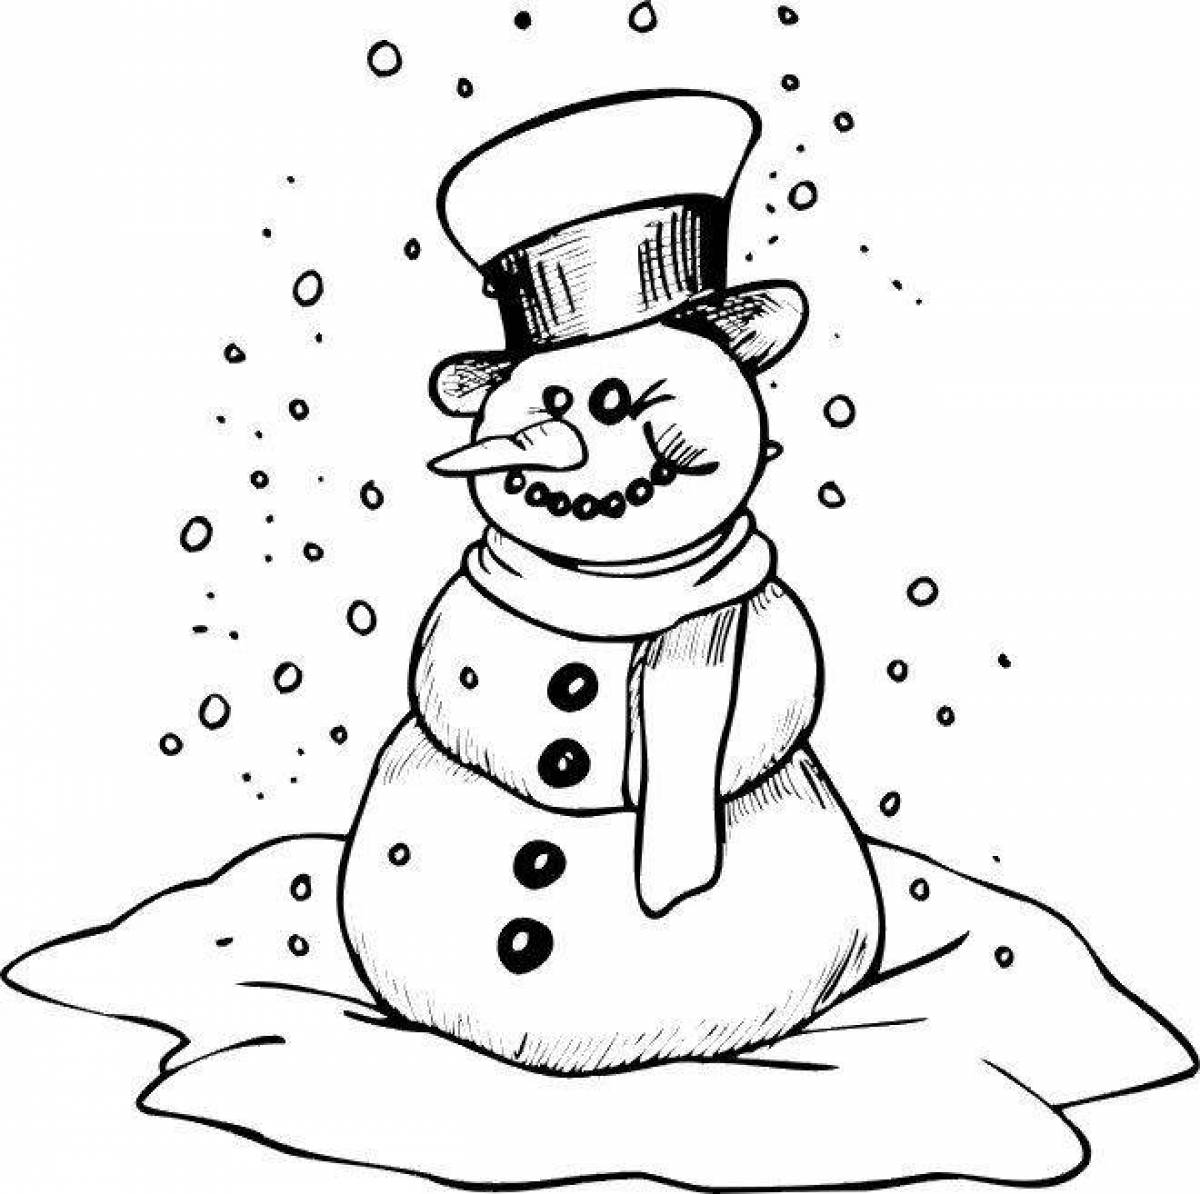 Awesome snowman coloring book